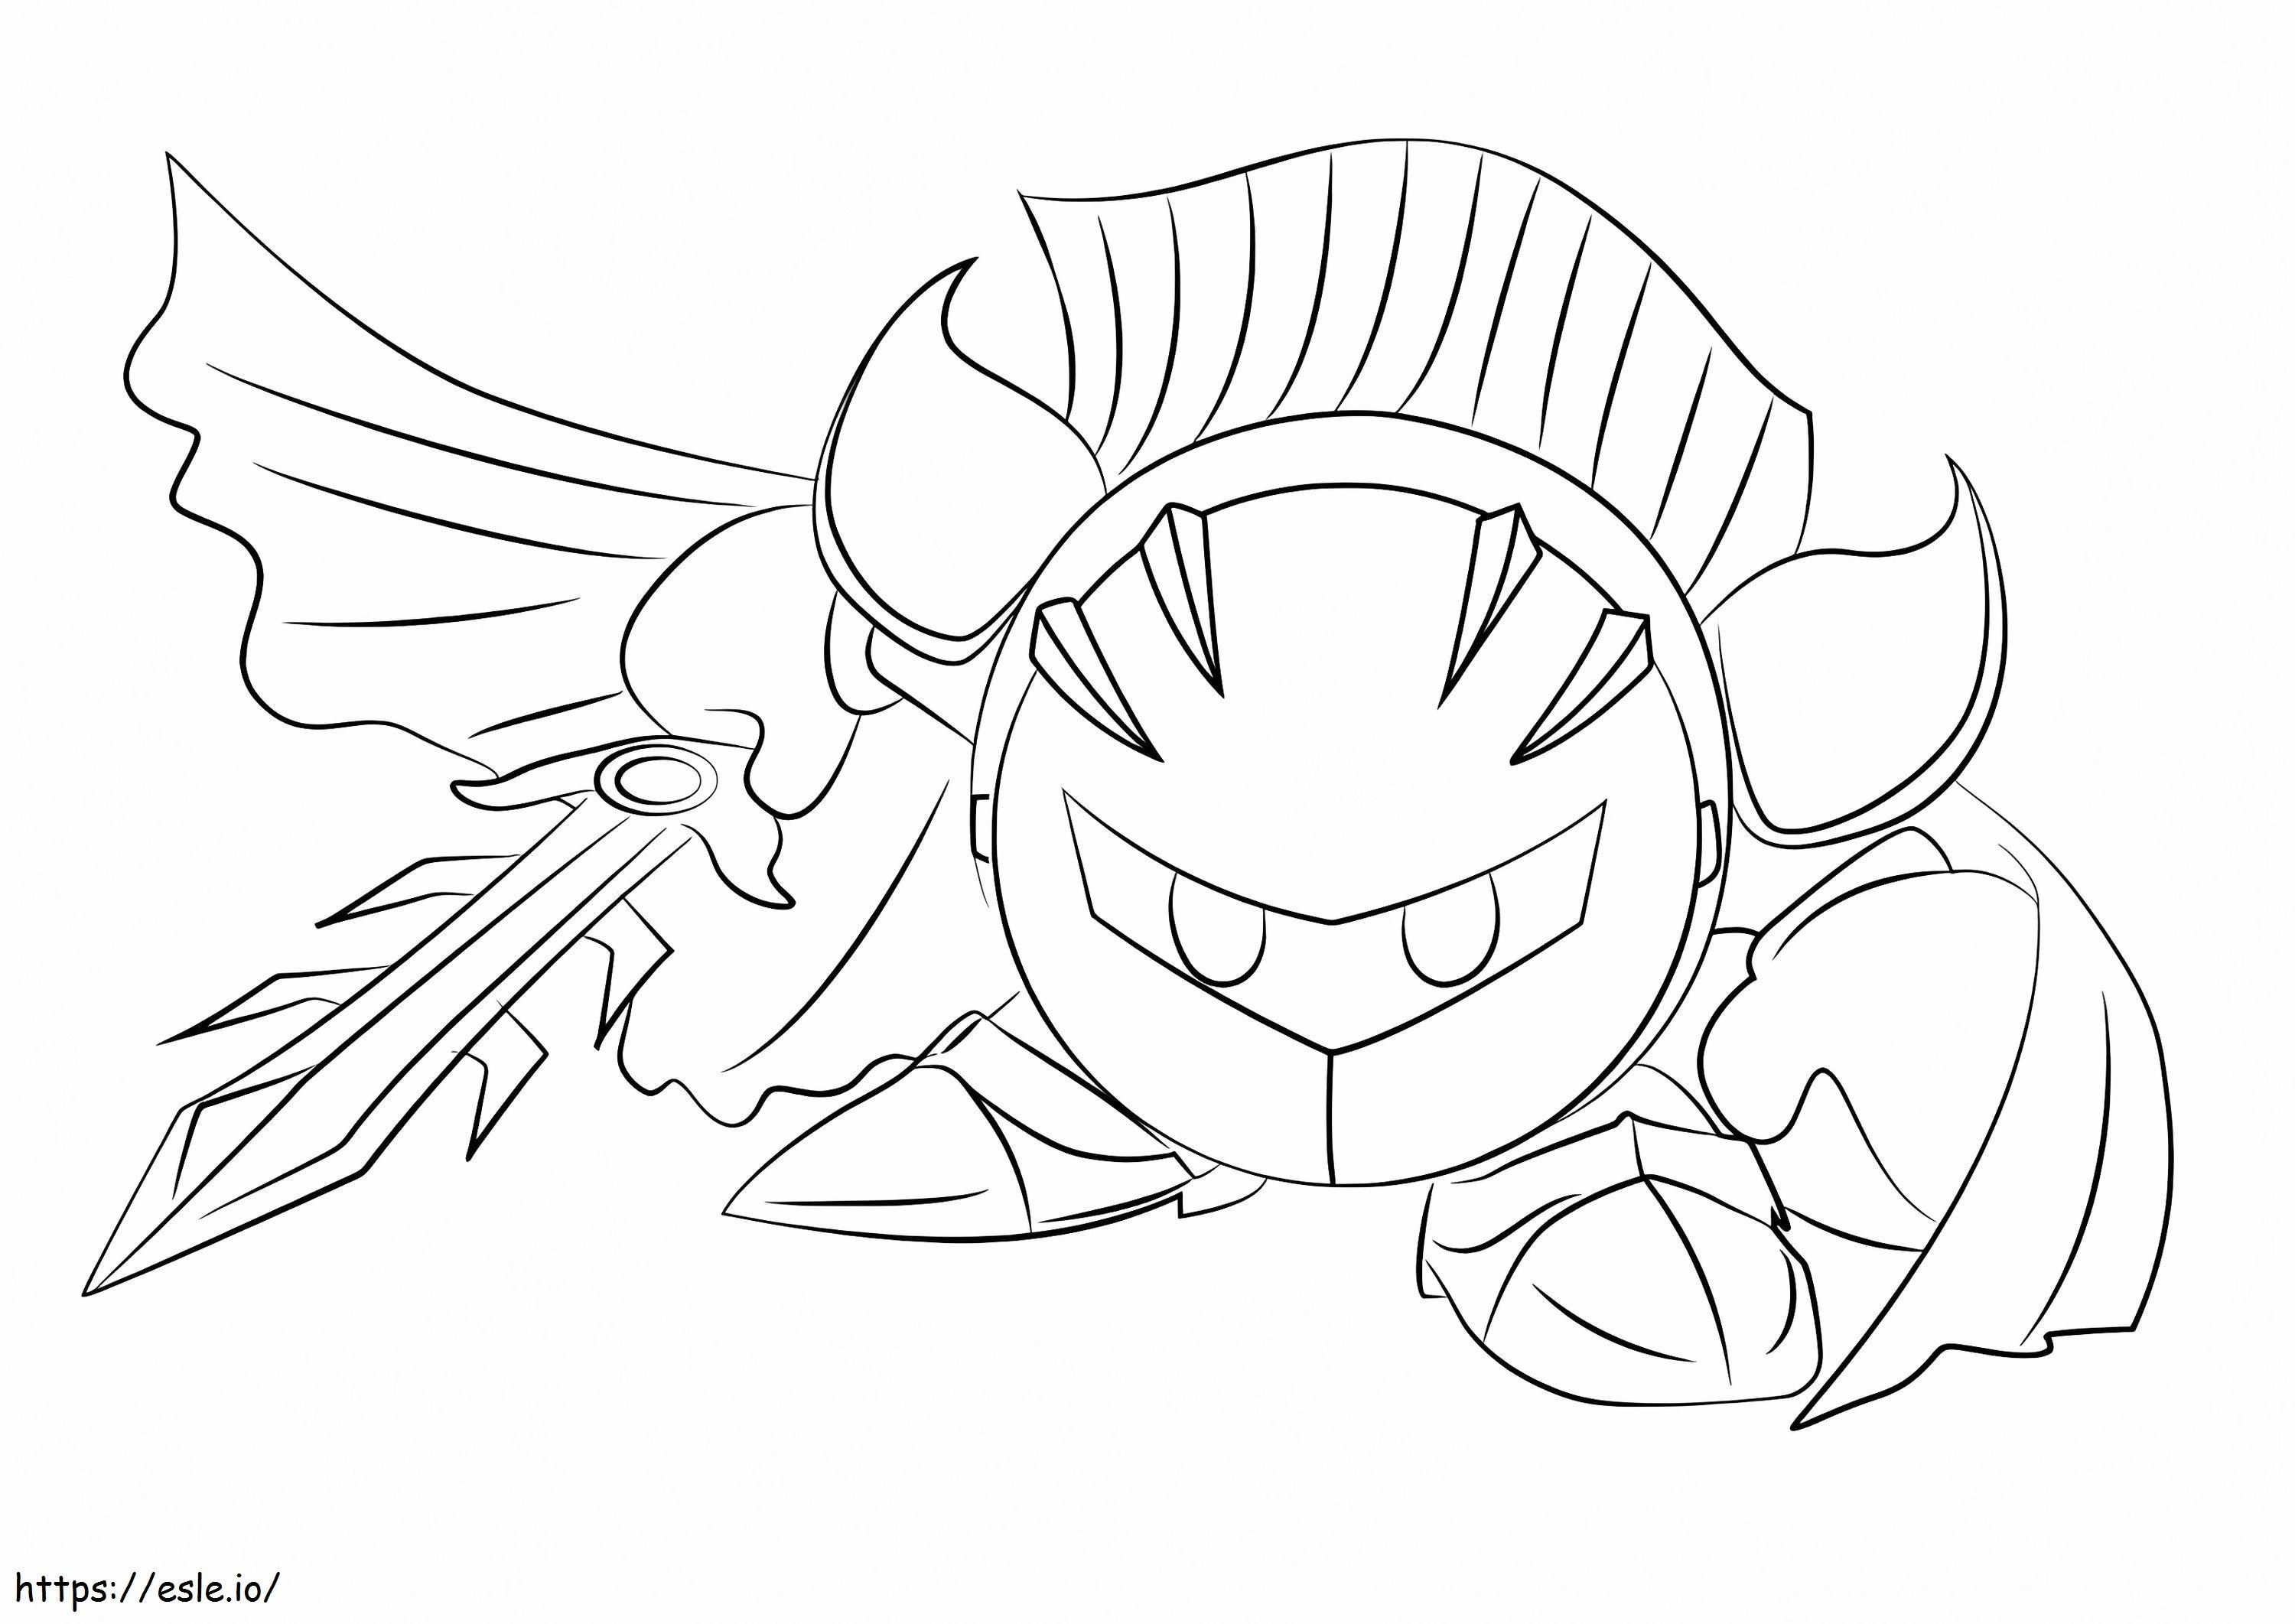 Meta Knight 4 coloring page